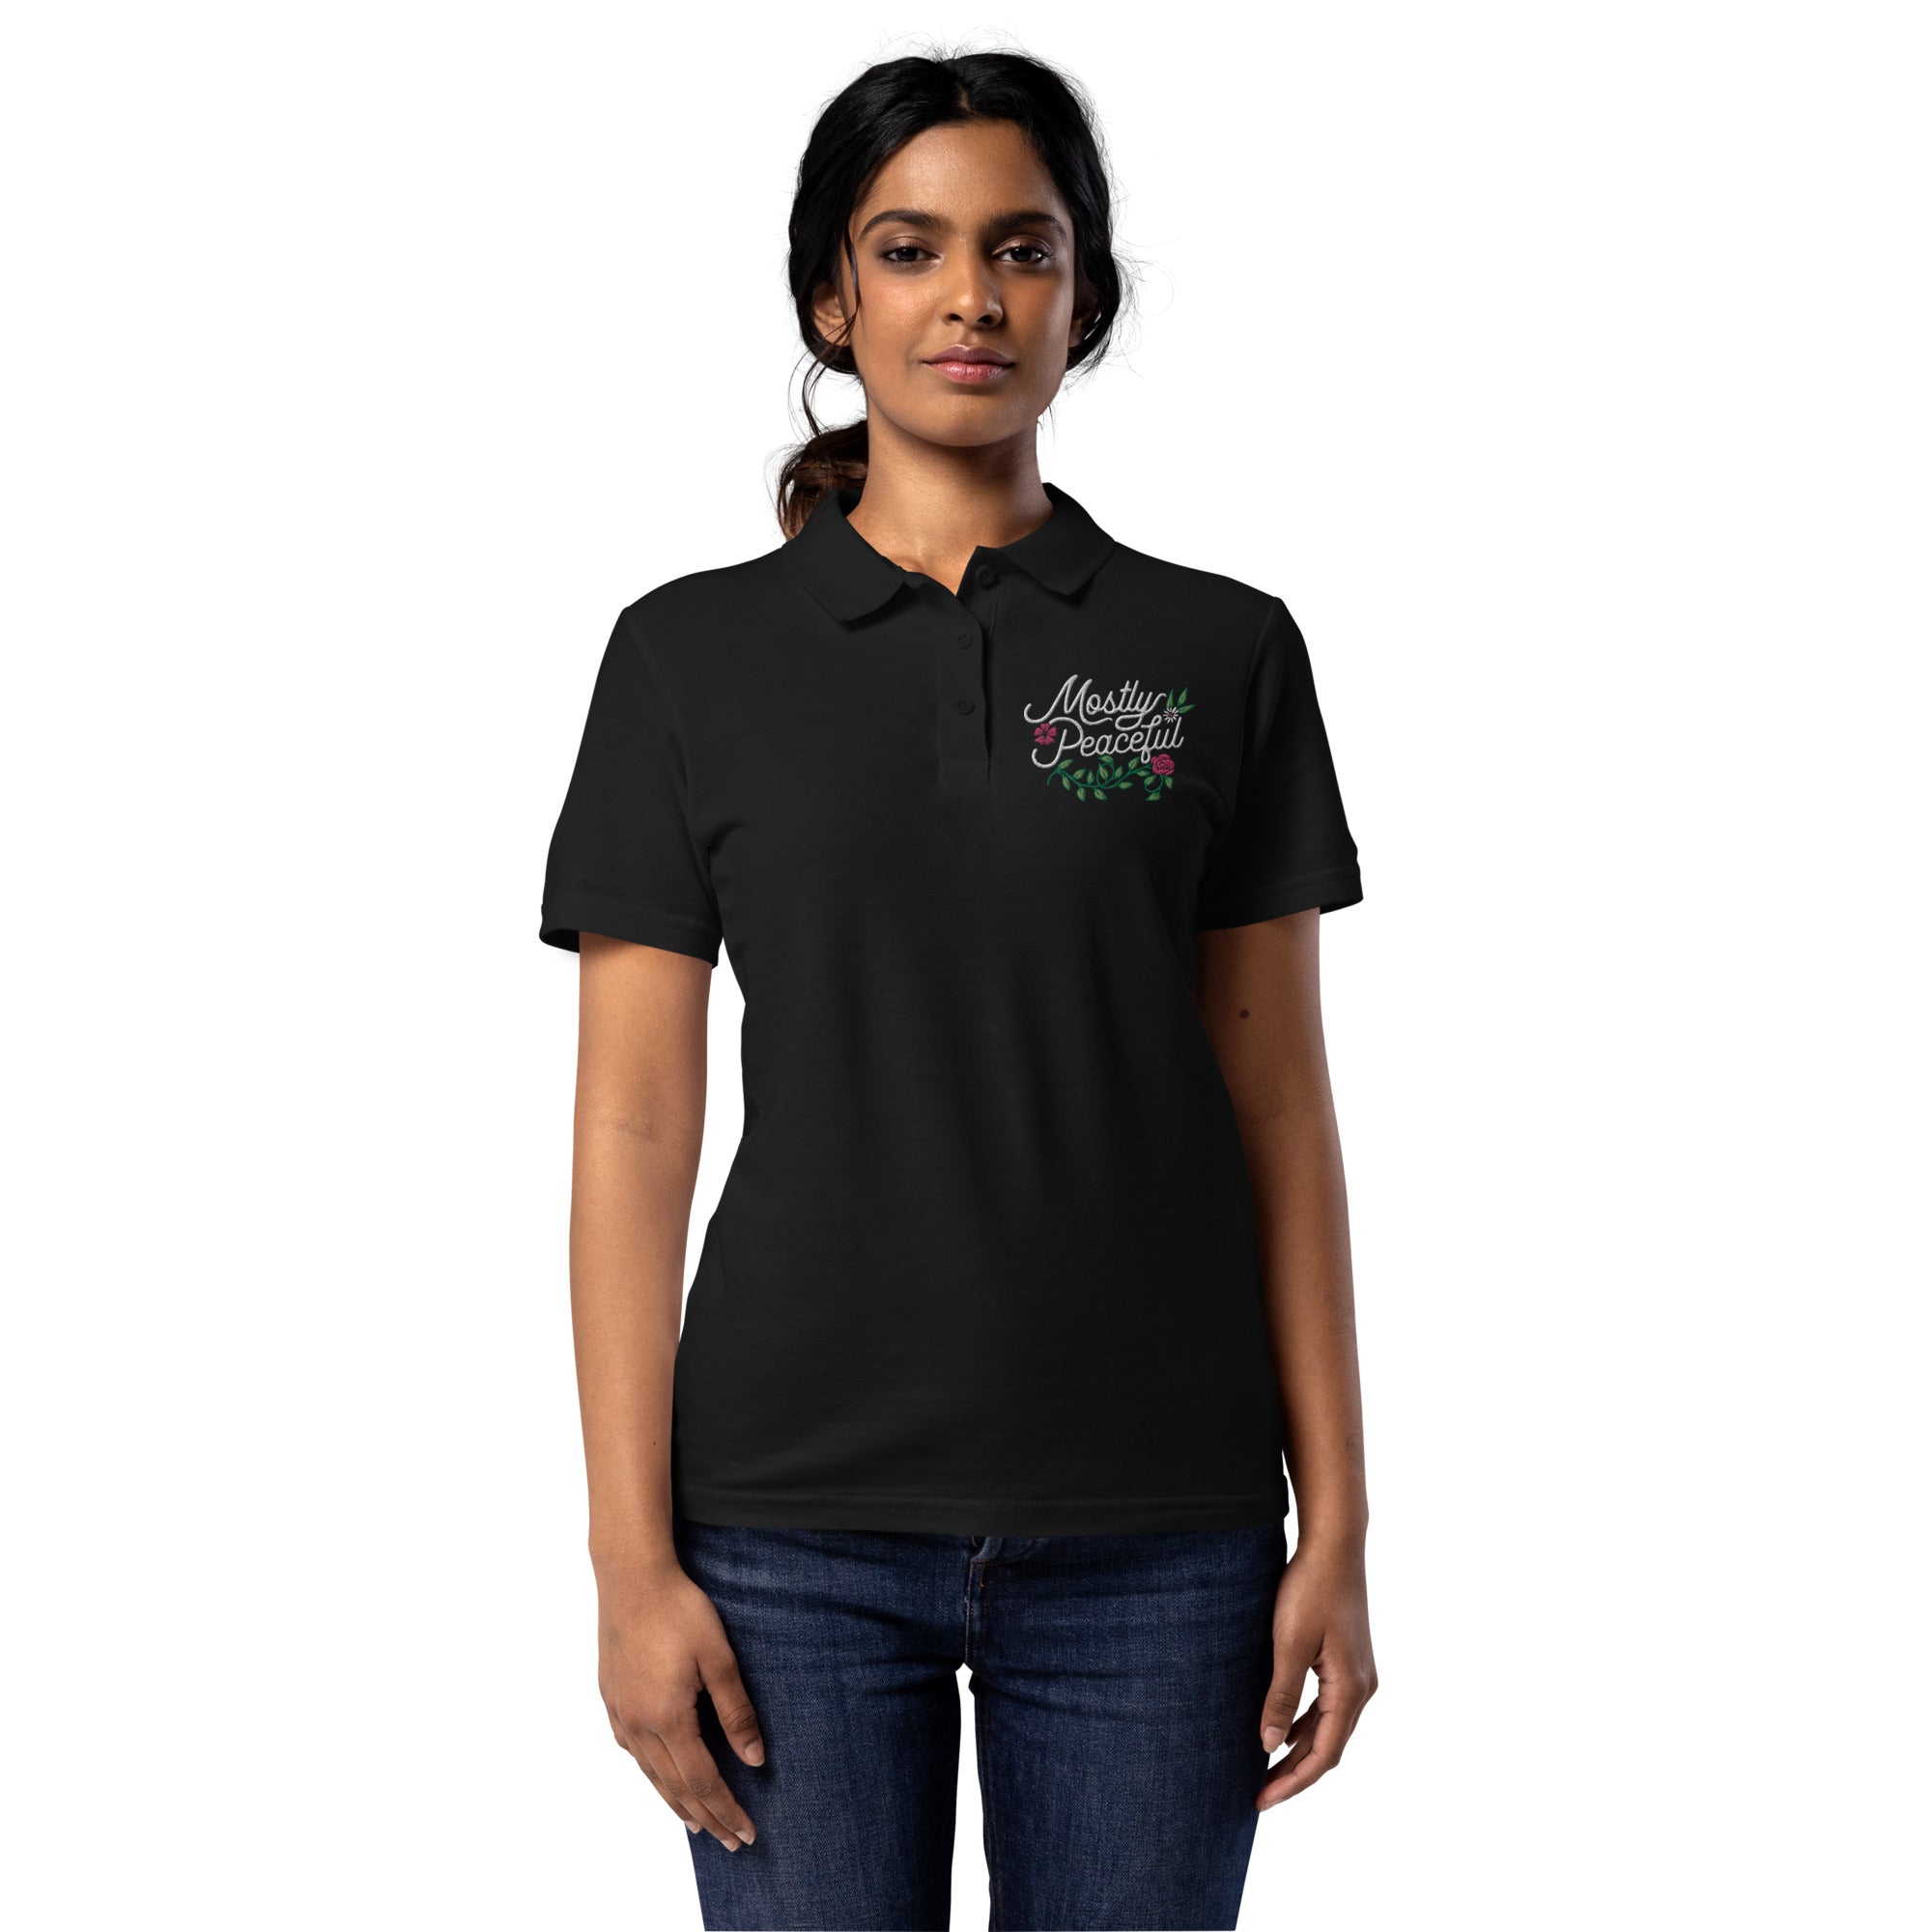 Mostly Peaceful Women’s Pique Polo Shirt